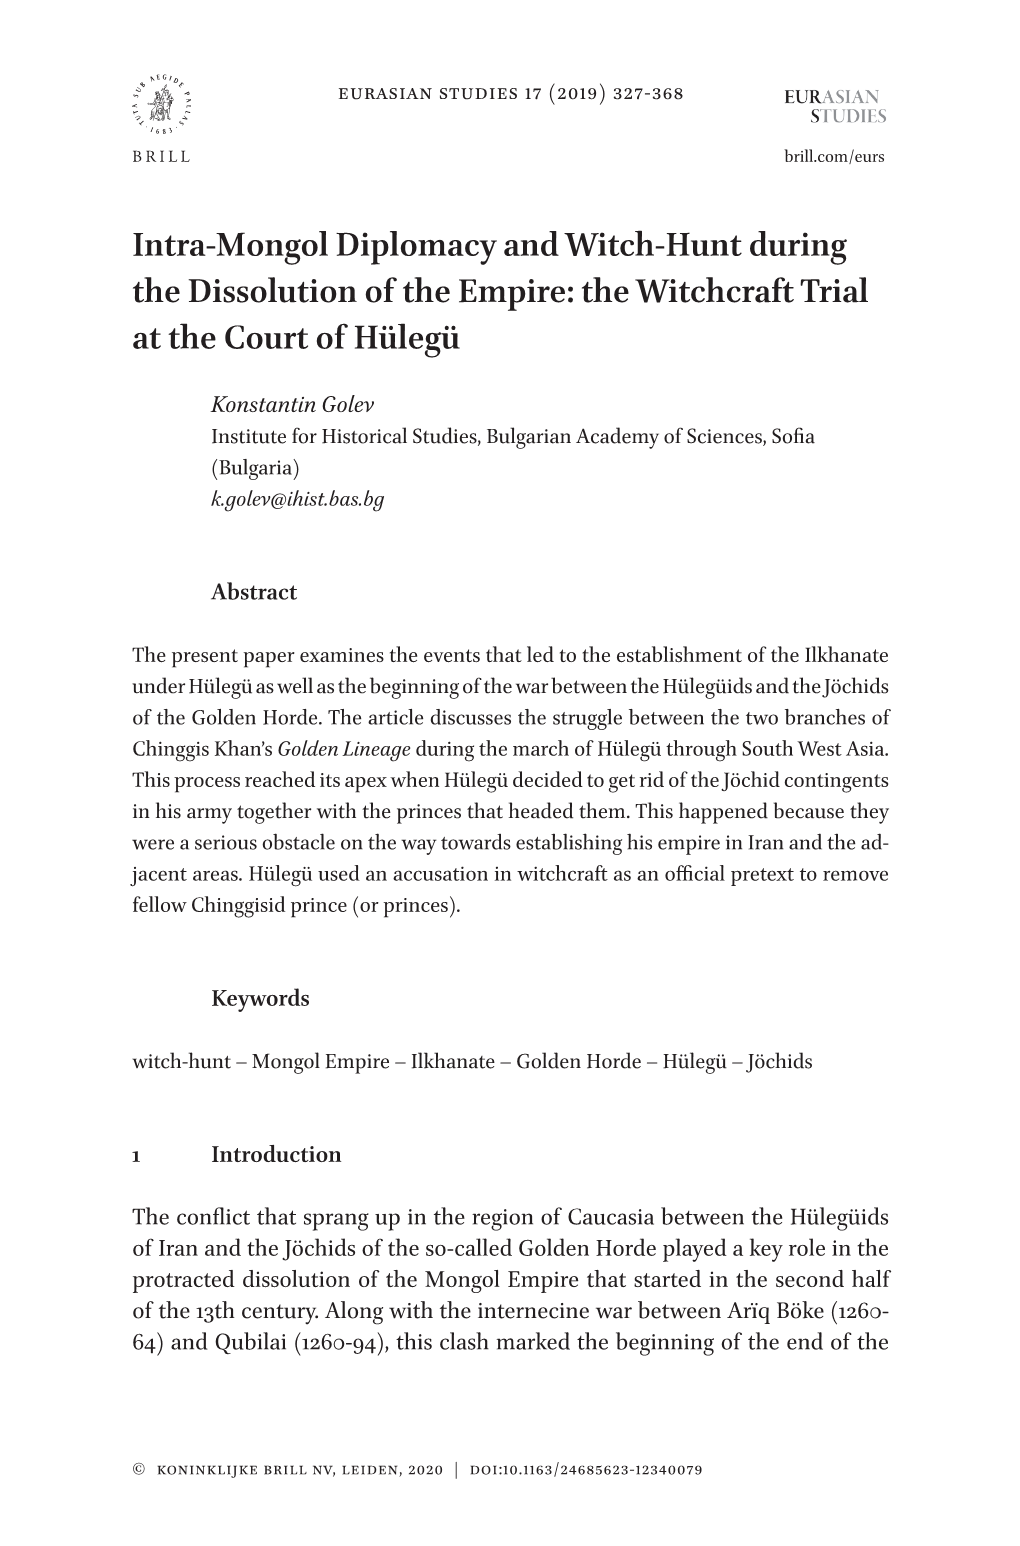 Intra-Mongol Diplomacy and Witch-Hunt During the Dissolution of the Empire: the Witchcraft Trial at the Court of Hülegü